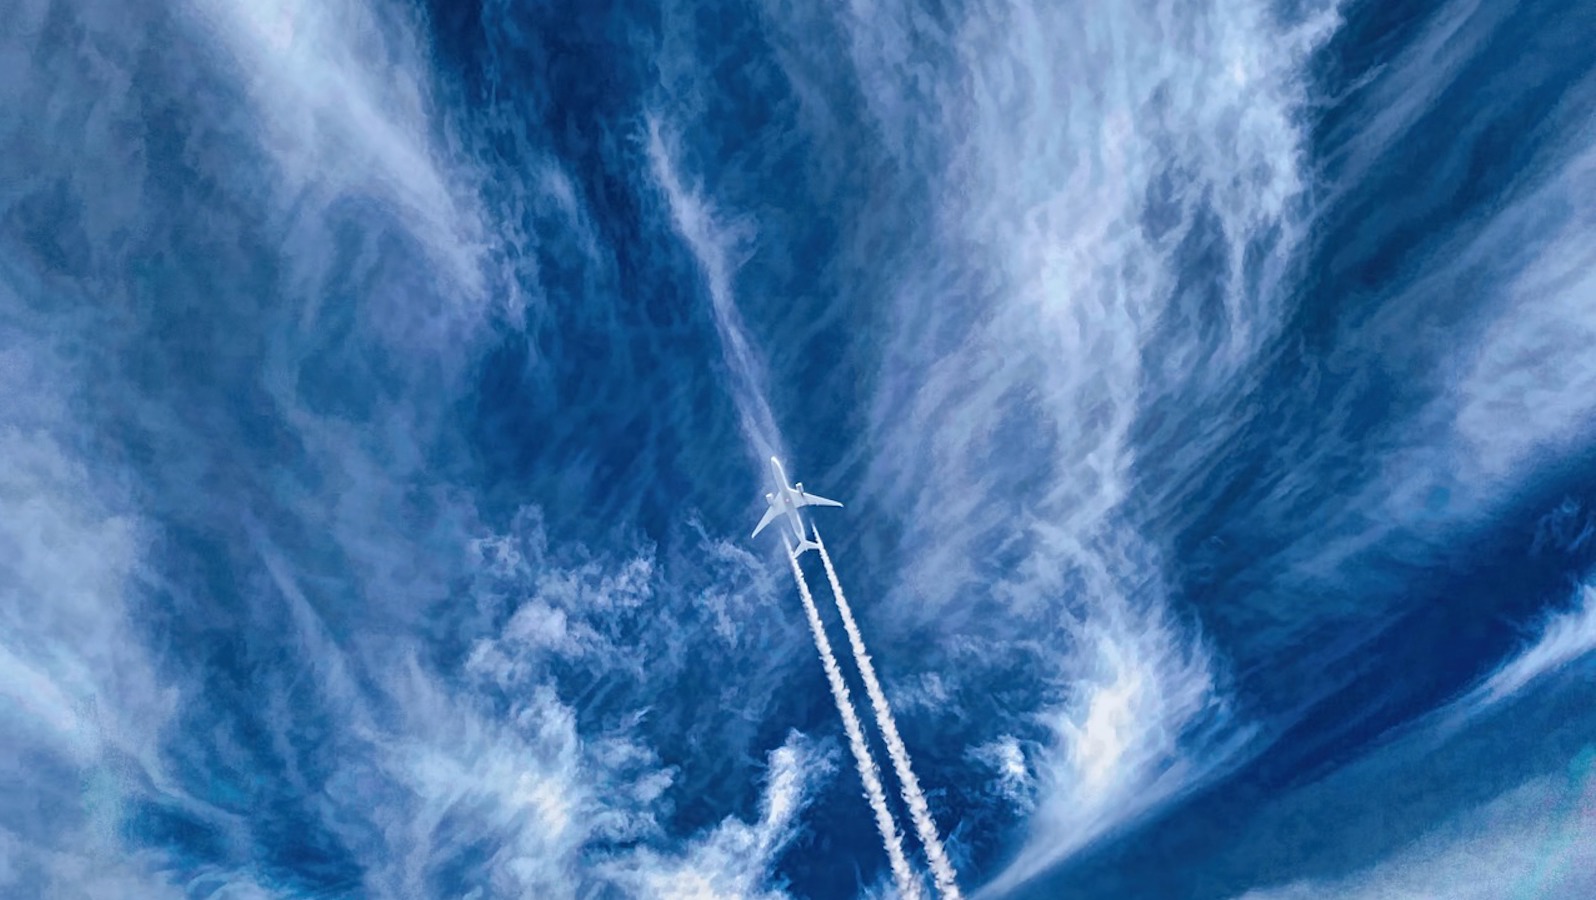 Below view of a plane with a trail against a blue sky with wispy clouds